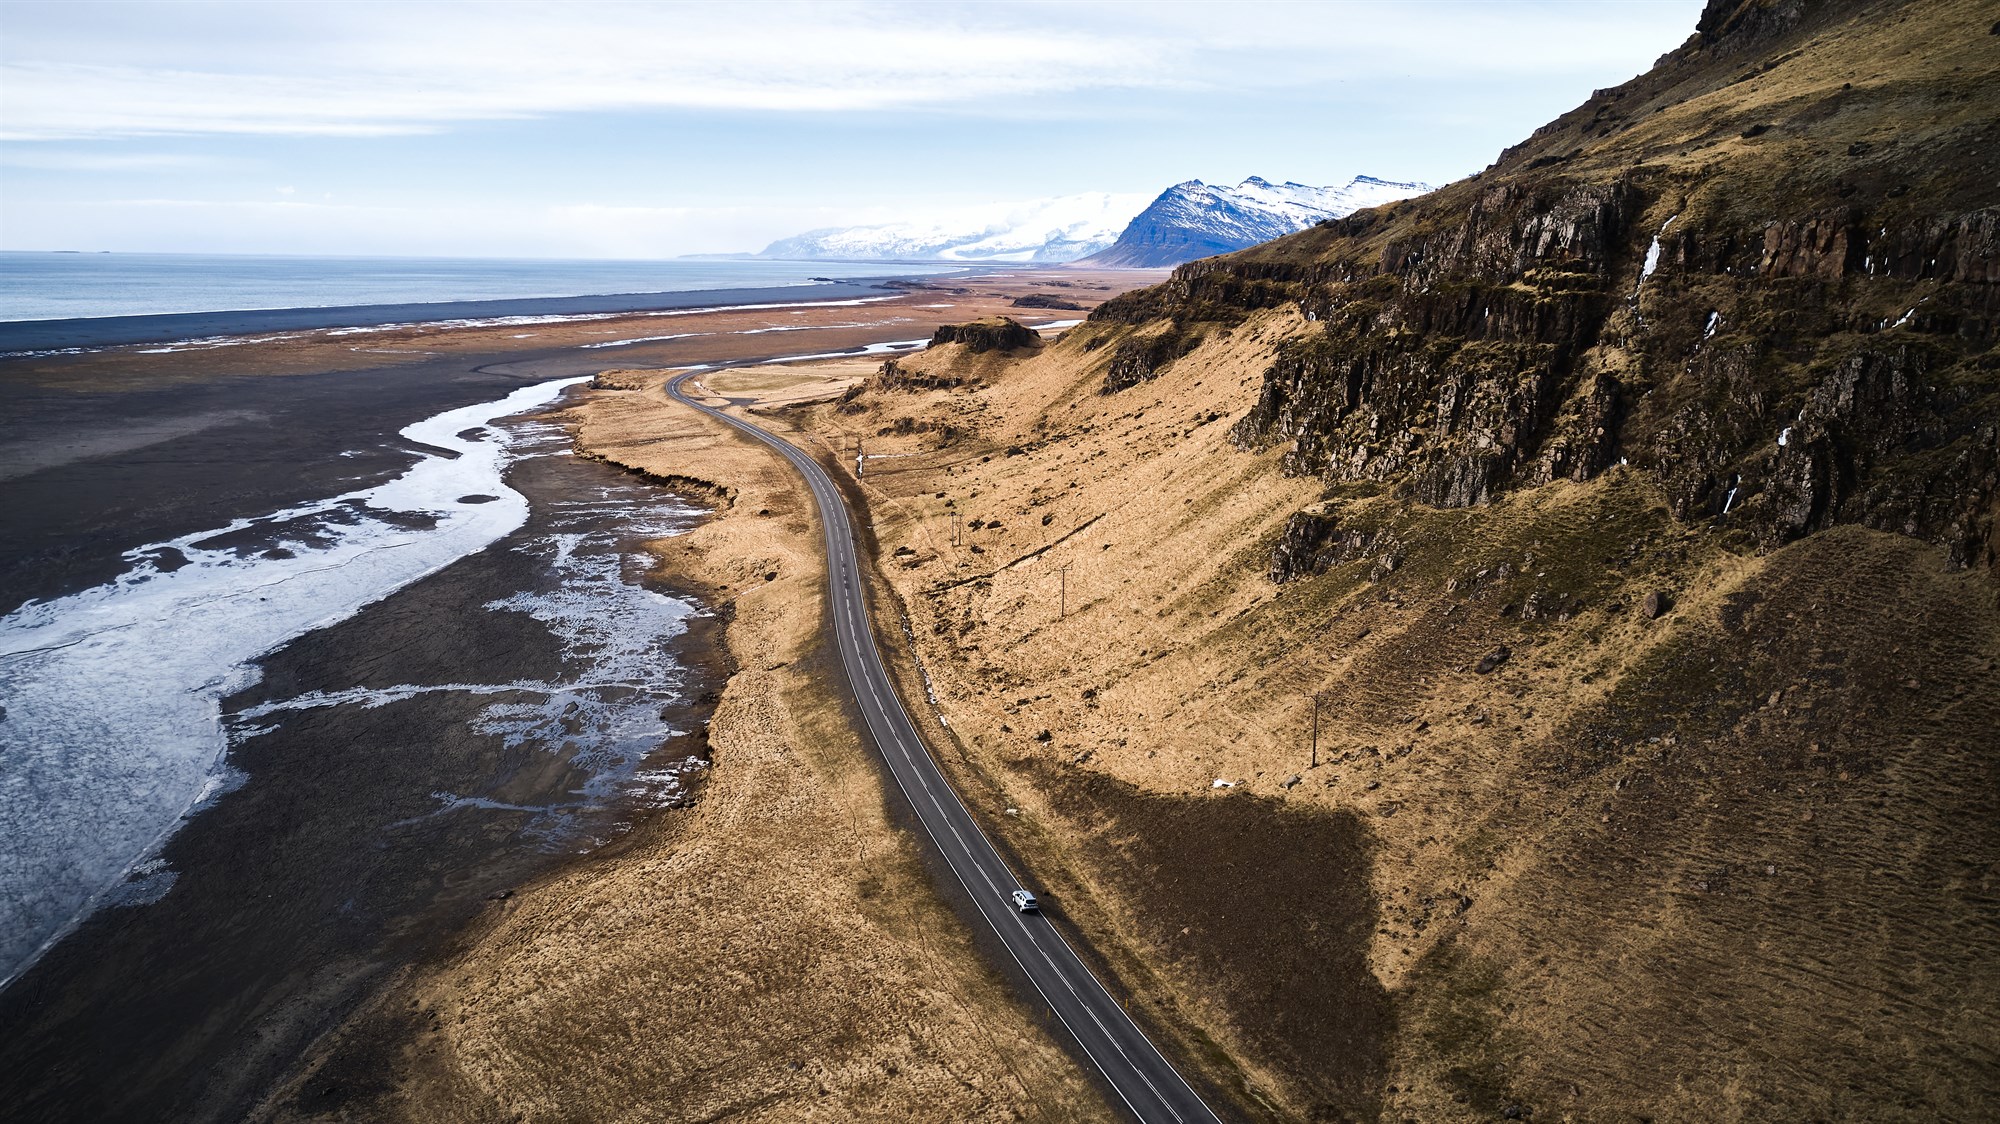 Lava Car Rental Iceland offers great selection of small, 4x4 and campers for your Iceland trip